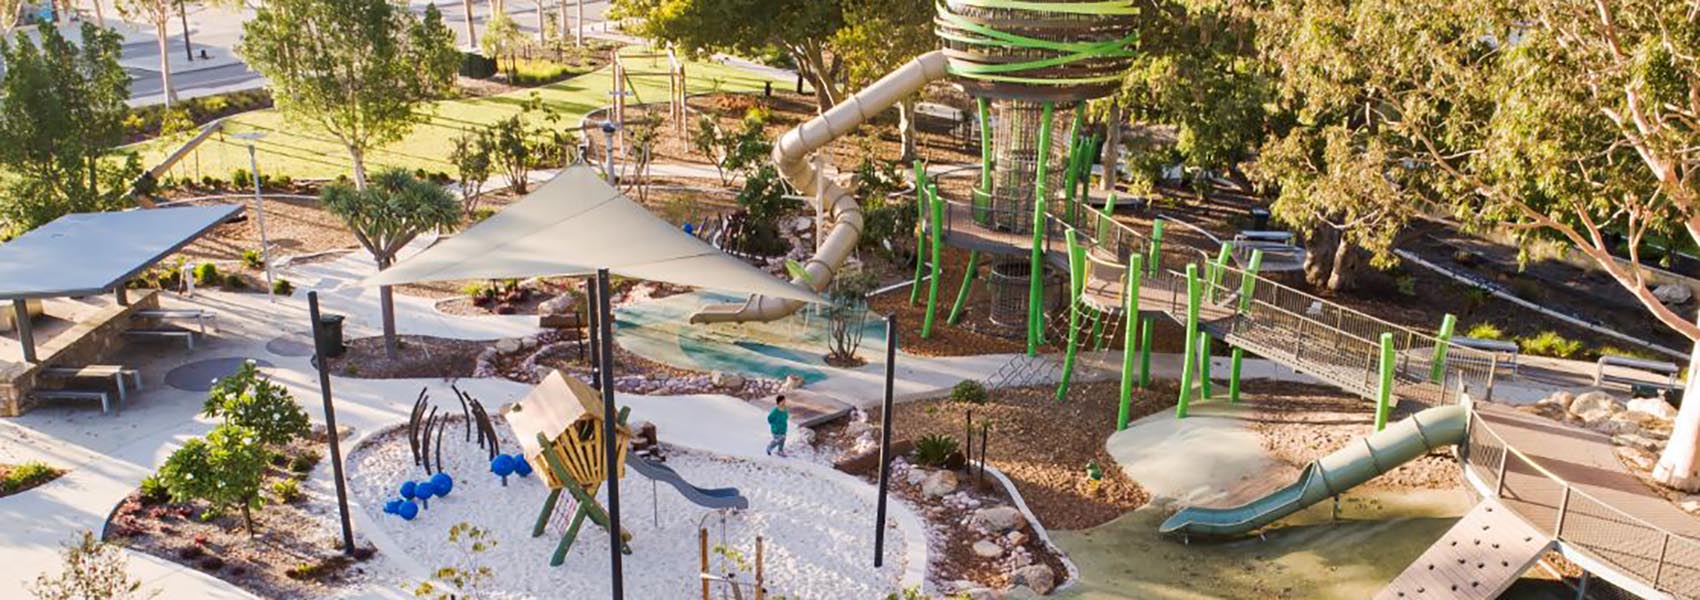 Jungle Park in Whiteman's Edge in Brabham features a high bird's nest for kids